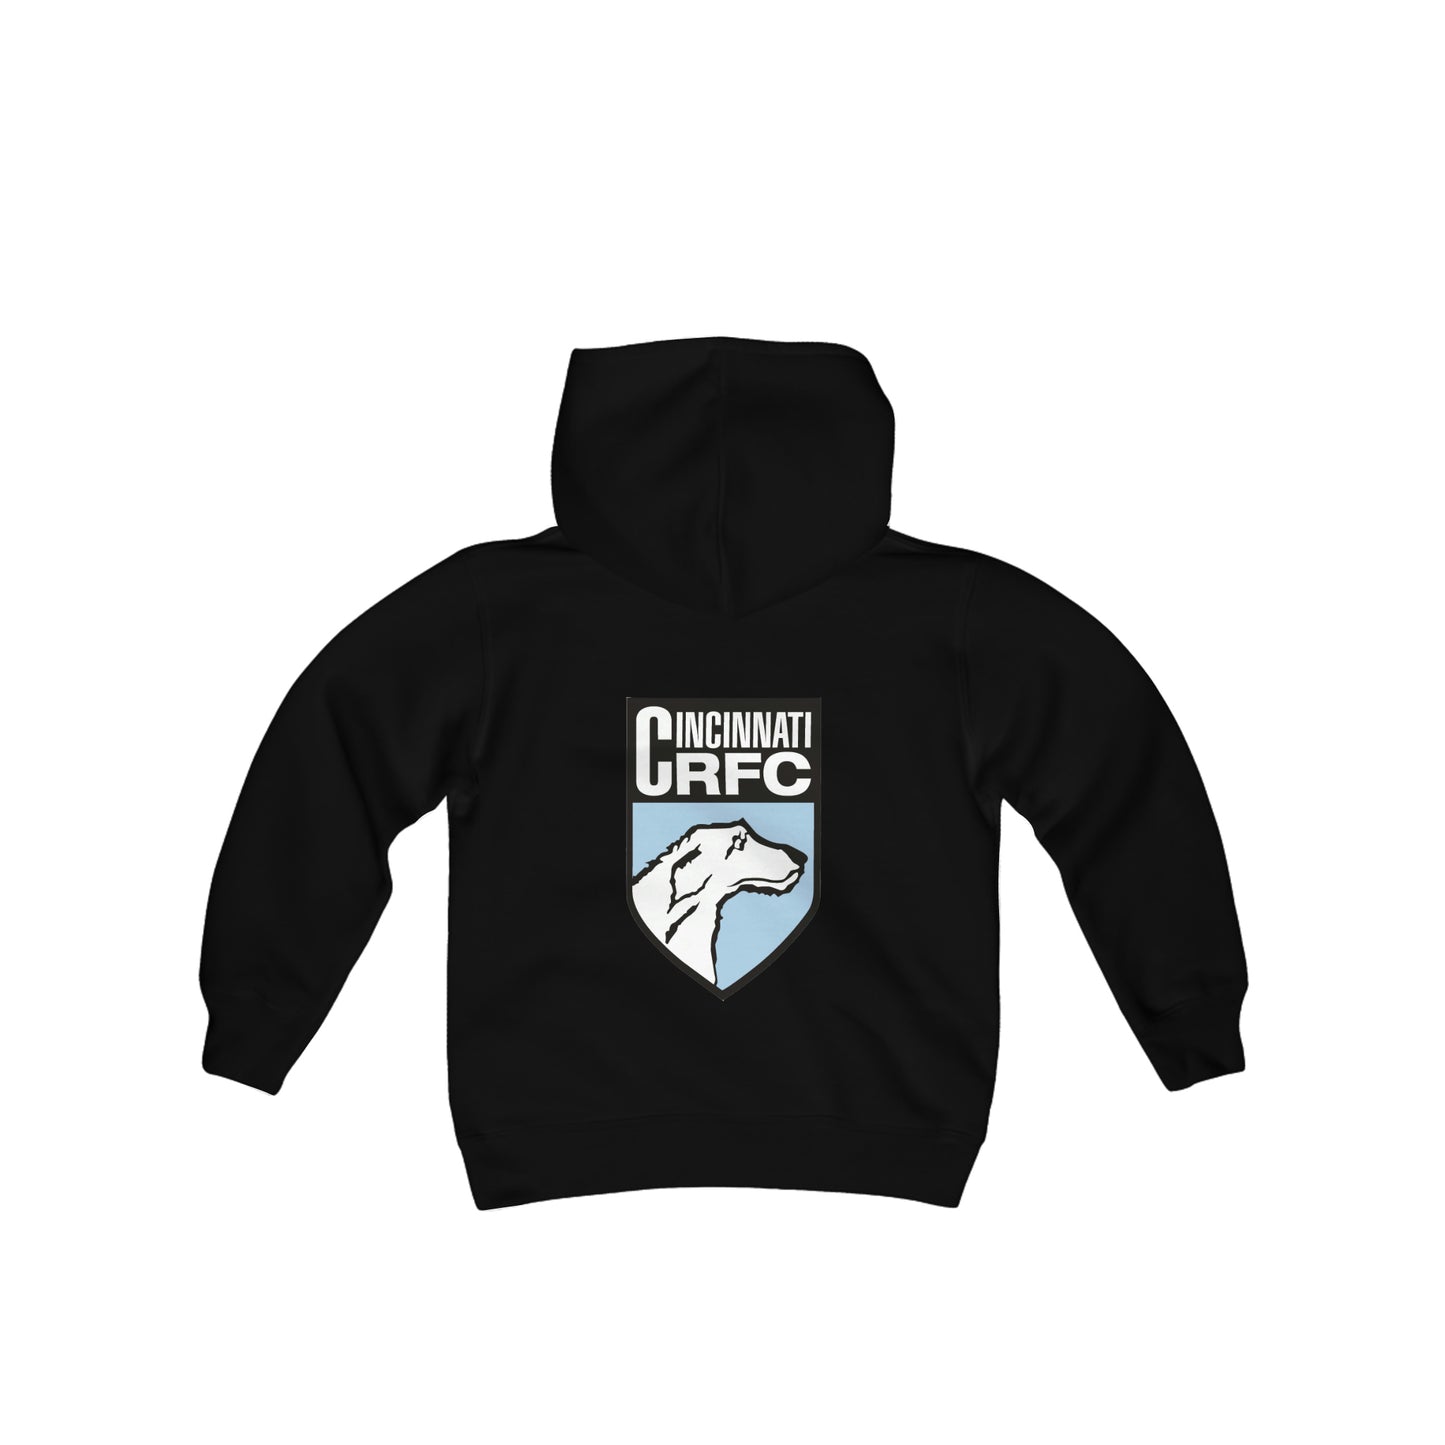 Youth Heavy Blend Hooded Sweatshirt | CRFC Wolfhounds Blue Crest